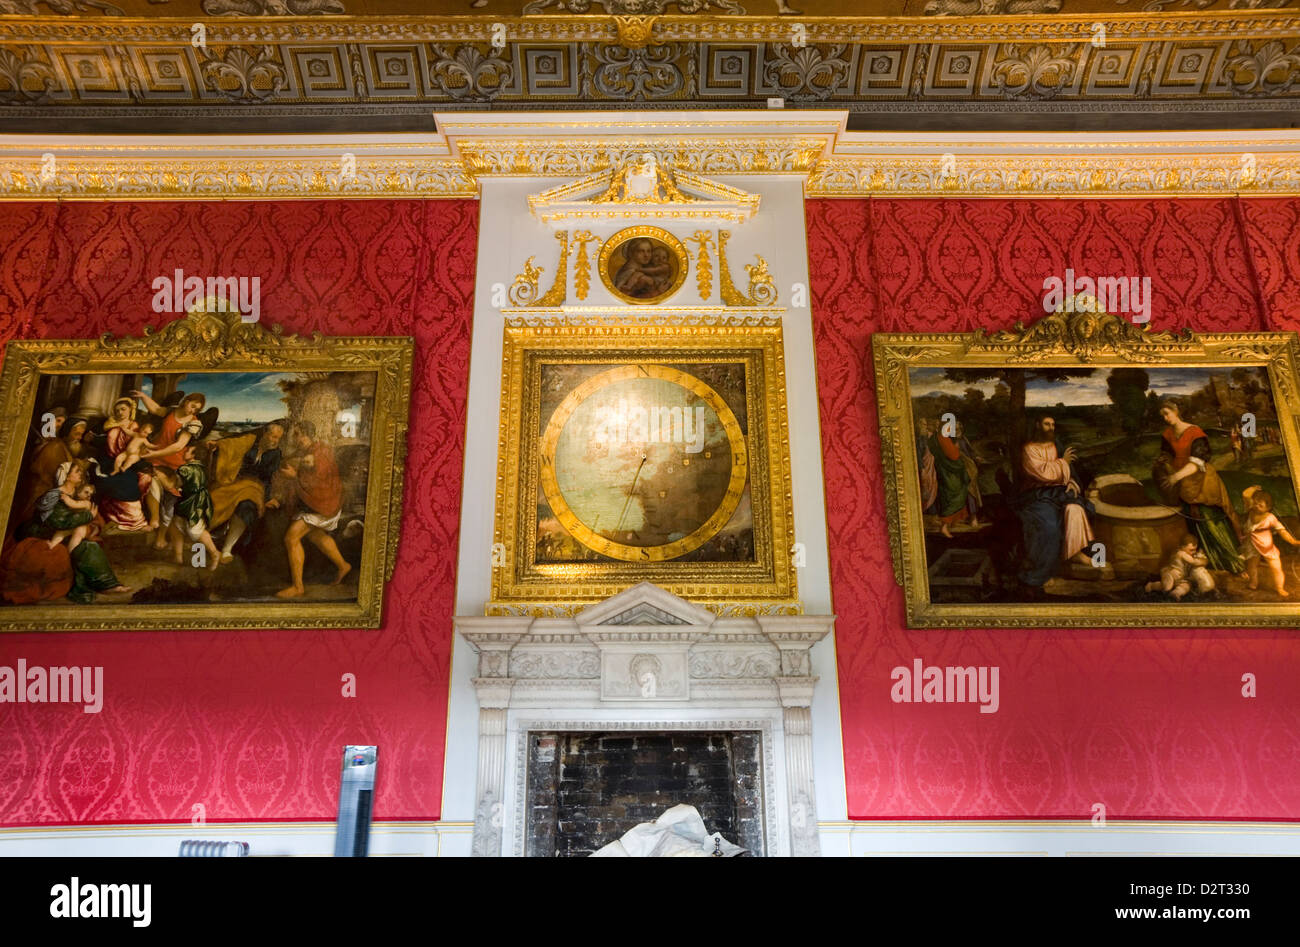 Wall, with chimney piece, paintings and anemometer, in the The Kings Gallery of Kensington Palace, London. UK. Stock Photo